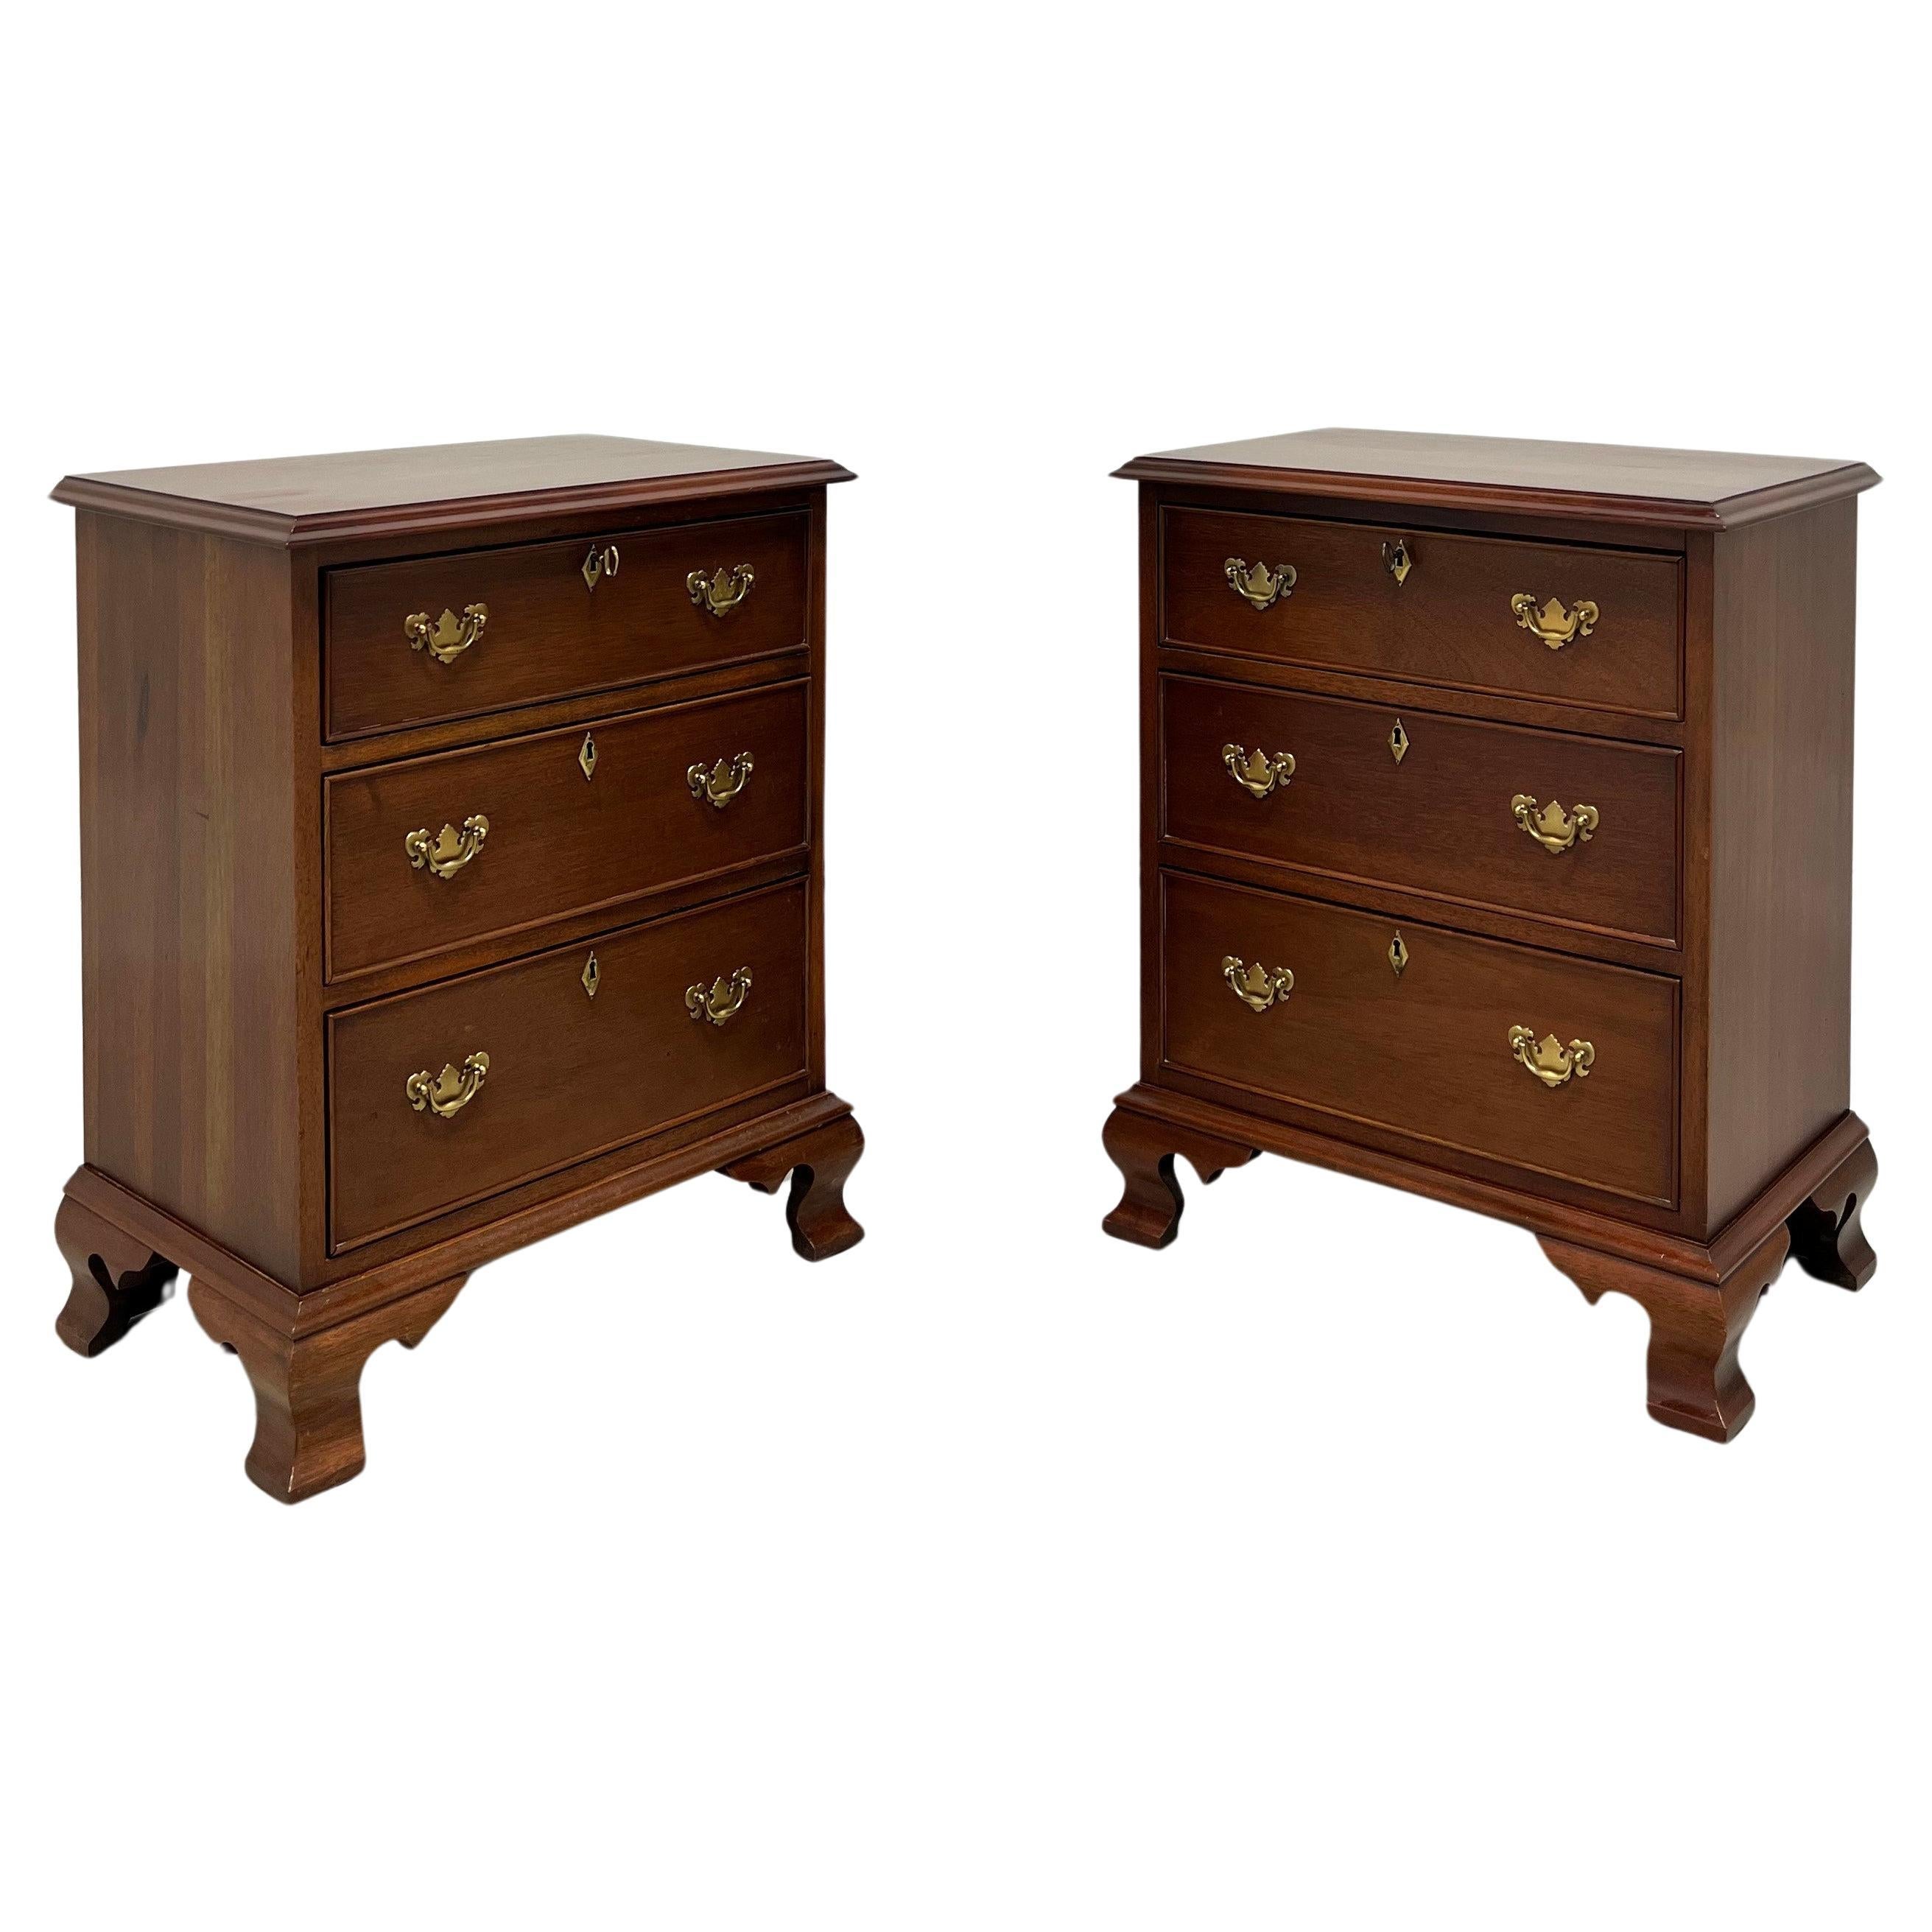 CRAFTIQUE Solid Mahogany Chippendale Style Three-Drawer Nightstands - Pair